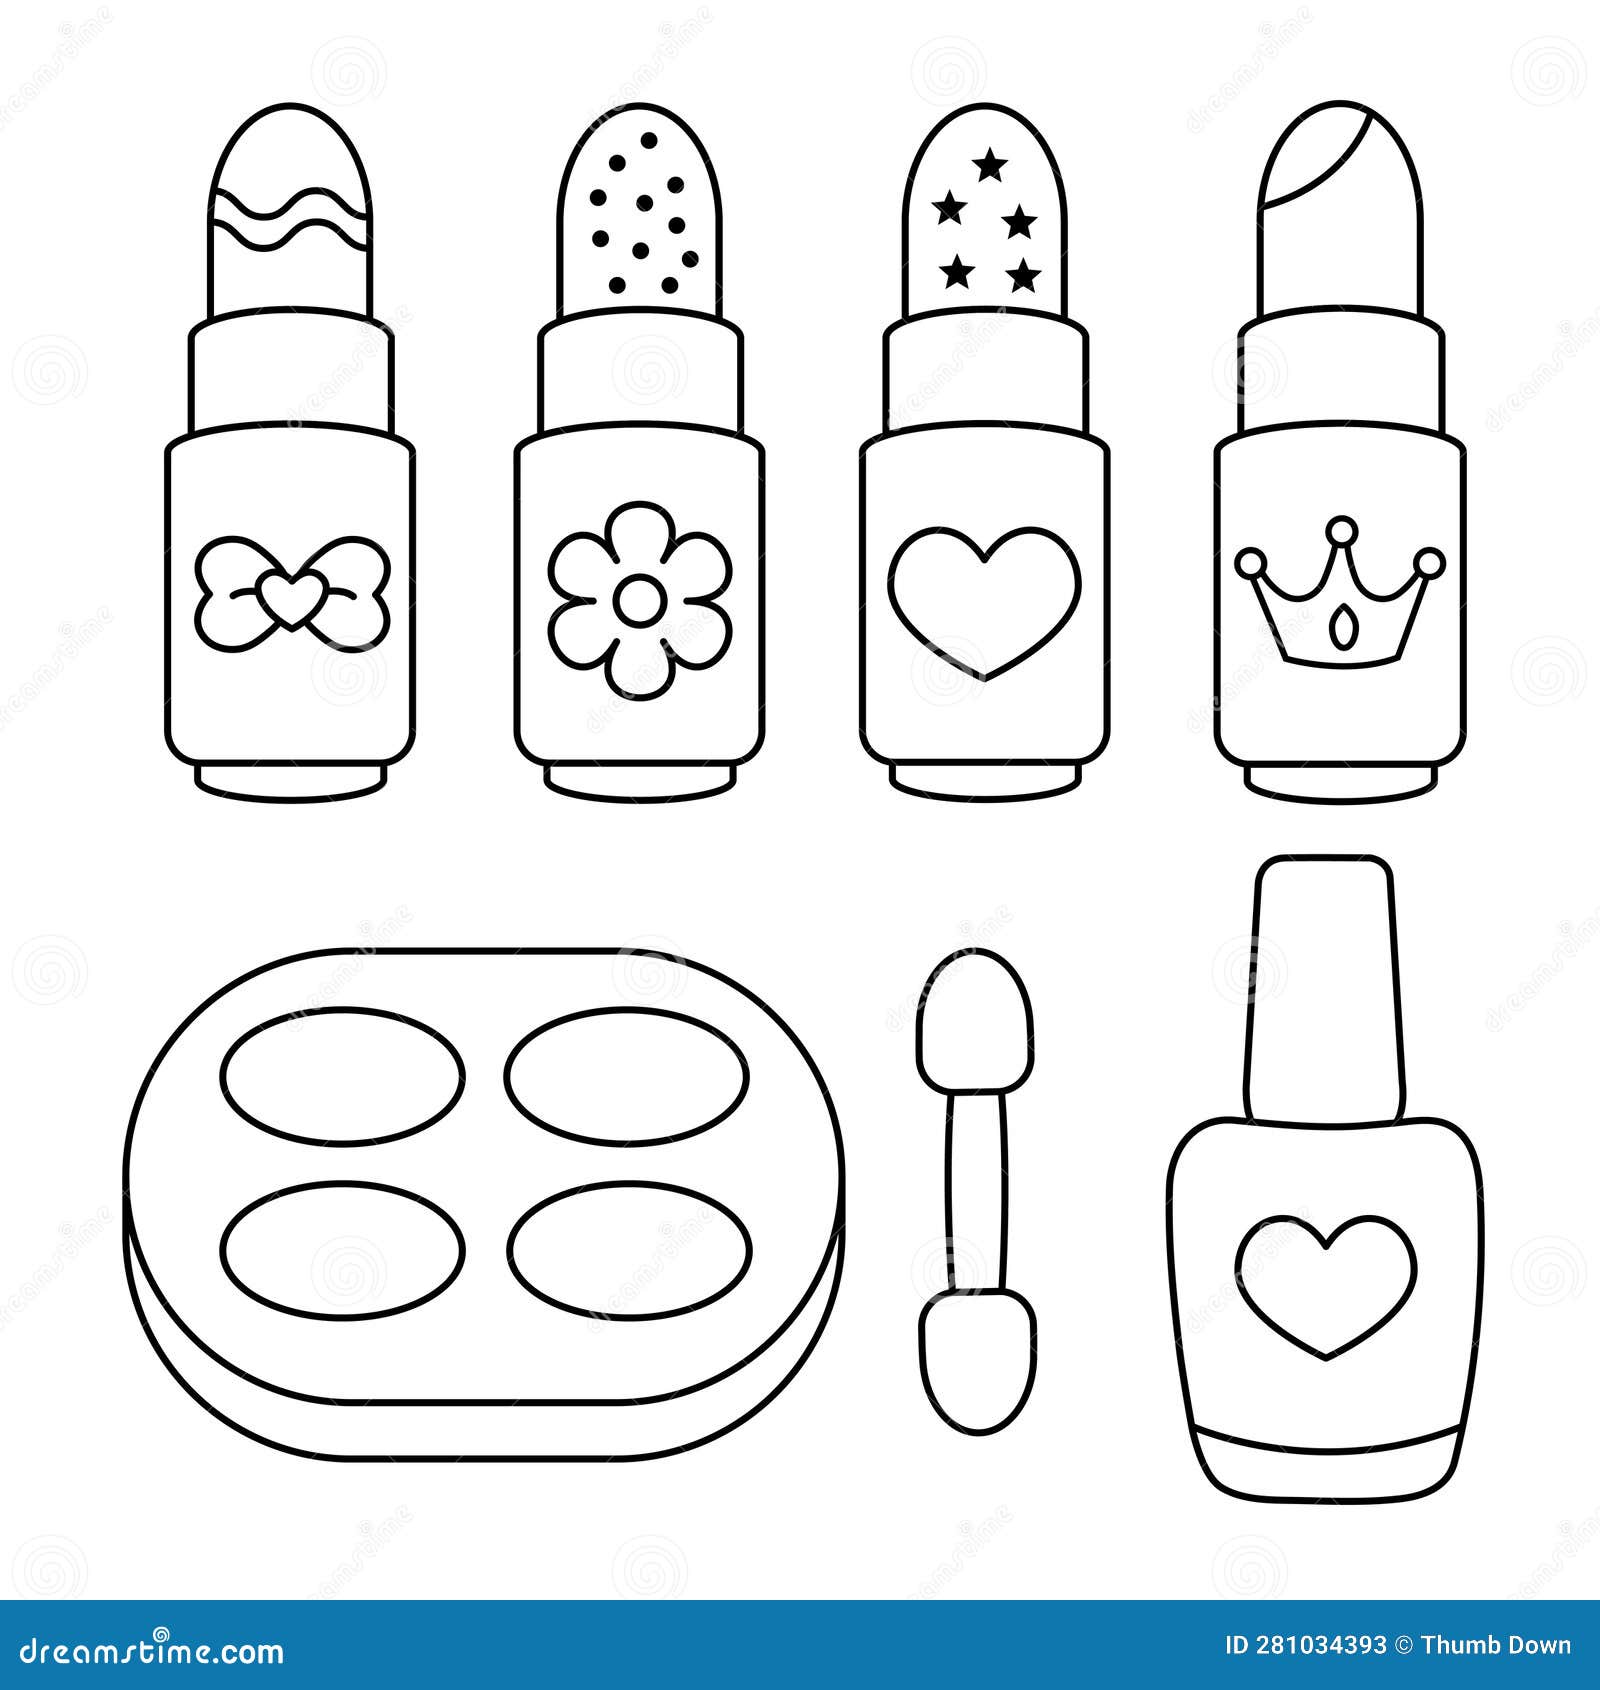 Makeup coloring pages stock illustrations â makeup coloring pages stock illustrations vectors clipart